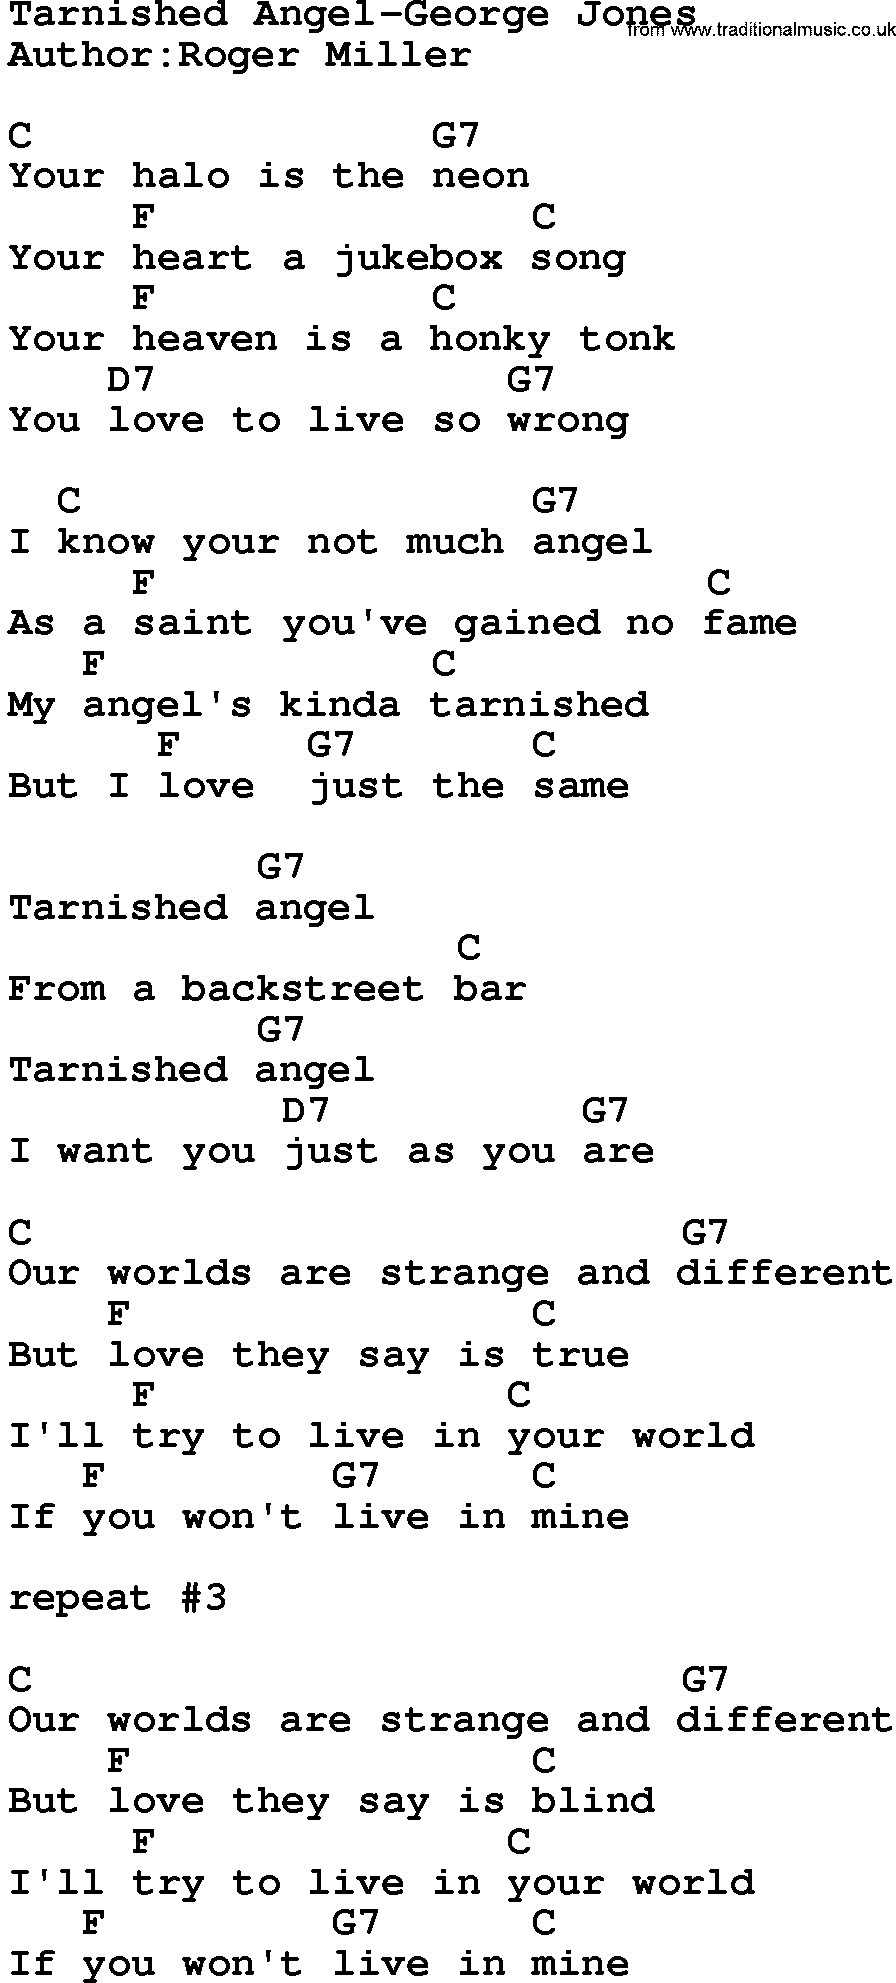 Country music song: Tarnished Angel-George Jones lyrics and chords